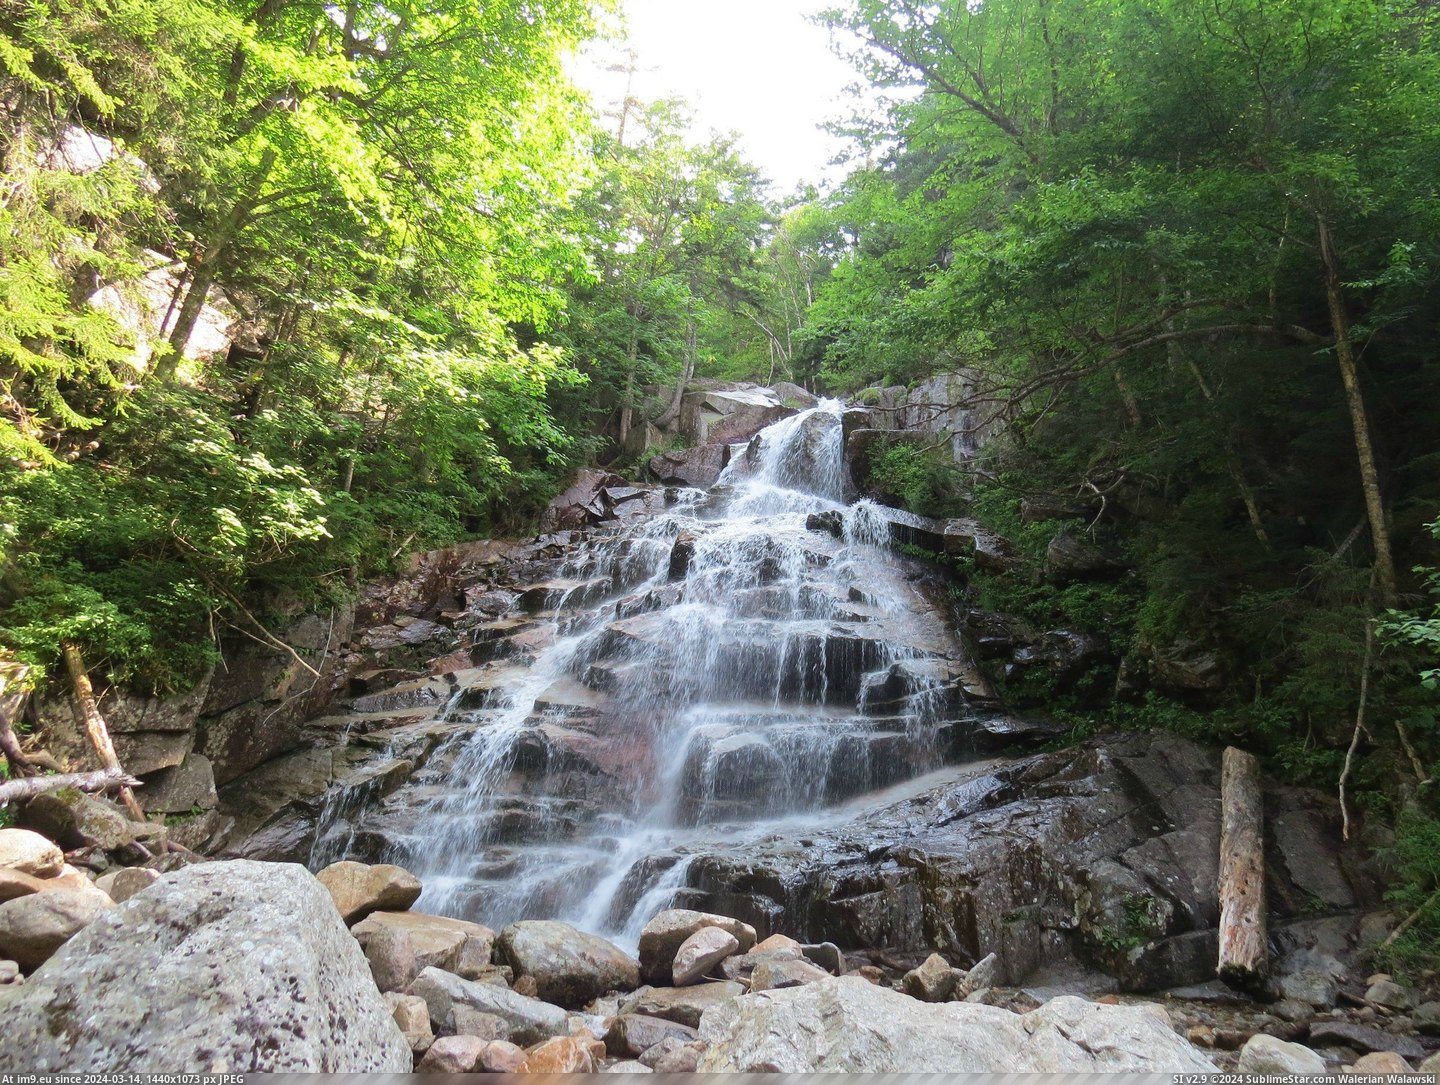 #Waterfall #Hiking #2400x1800 #Lincoln #Hampshire [Earthporn] Waterfall I came across while hiking up Mt. Lincoln, New Hampshire [2400x1800][OC] Pic. (Image of album My r/EARTHPORN favs))